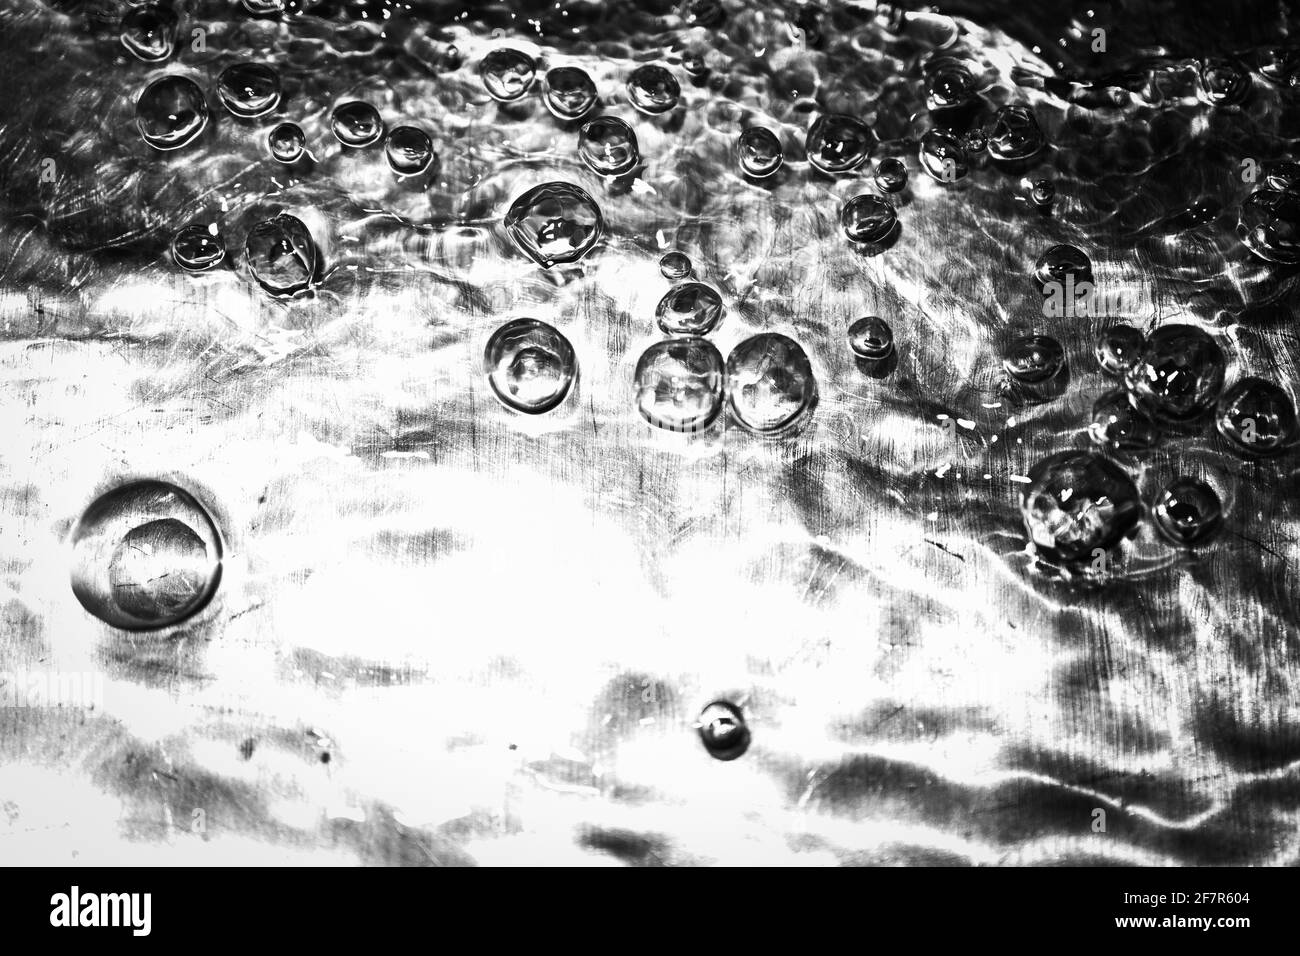 Extreme close up of moving water and bubbles with high contrast on metalic surface Stock Photo